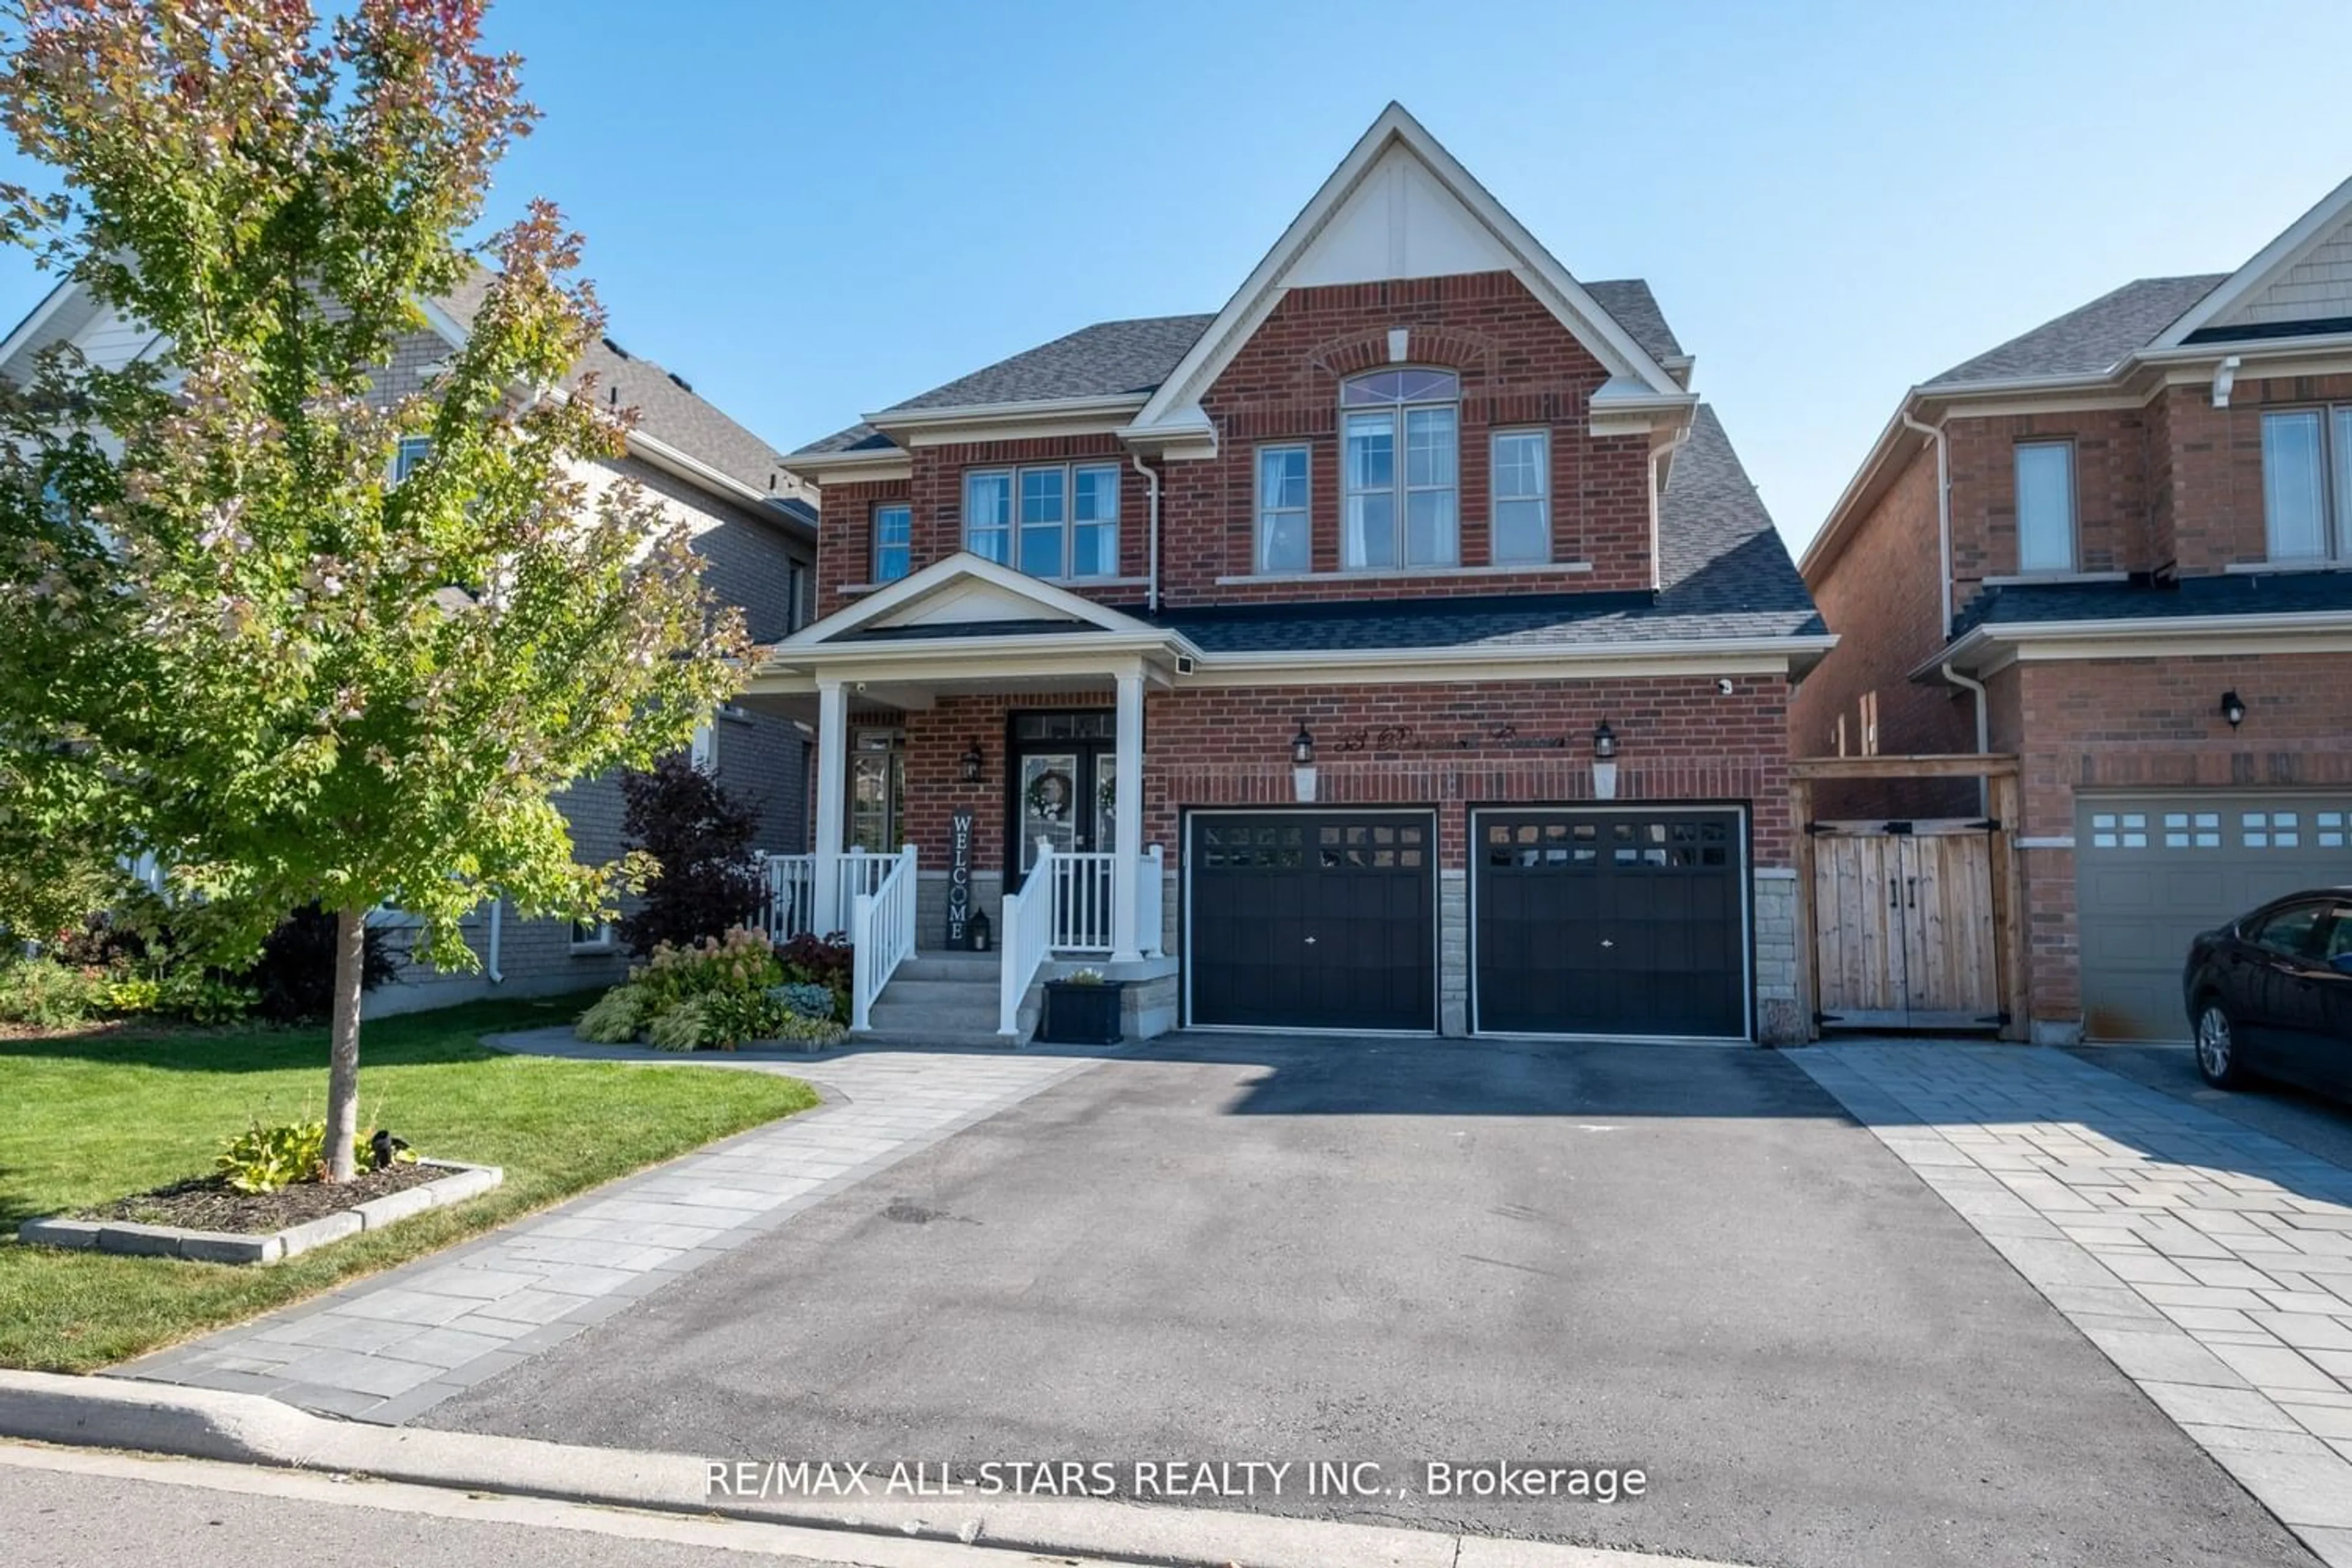 Home with brick exterior material for 33 Romanelli Cres, Bradford West Gwillimbury Ontario L3Z 0X7